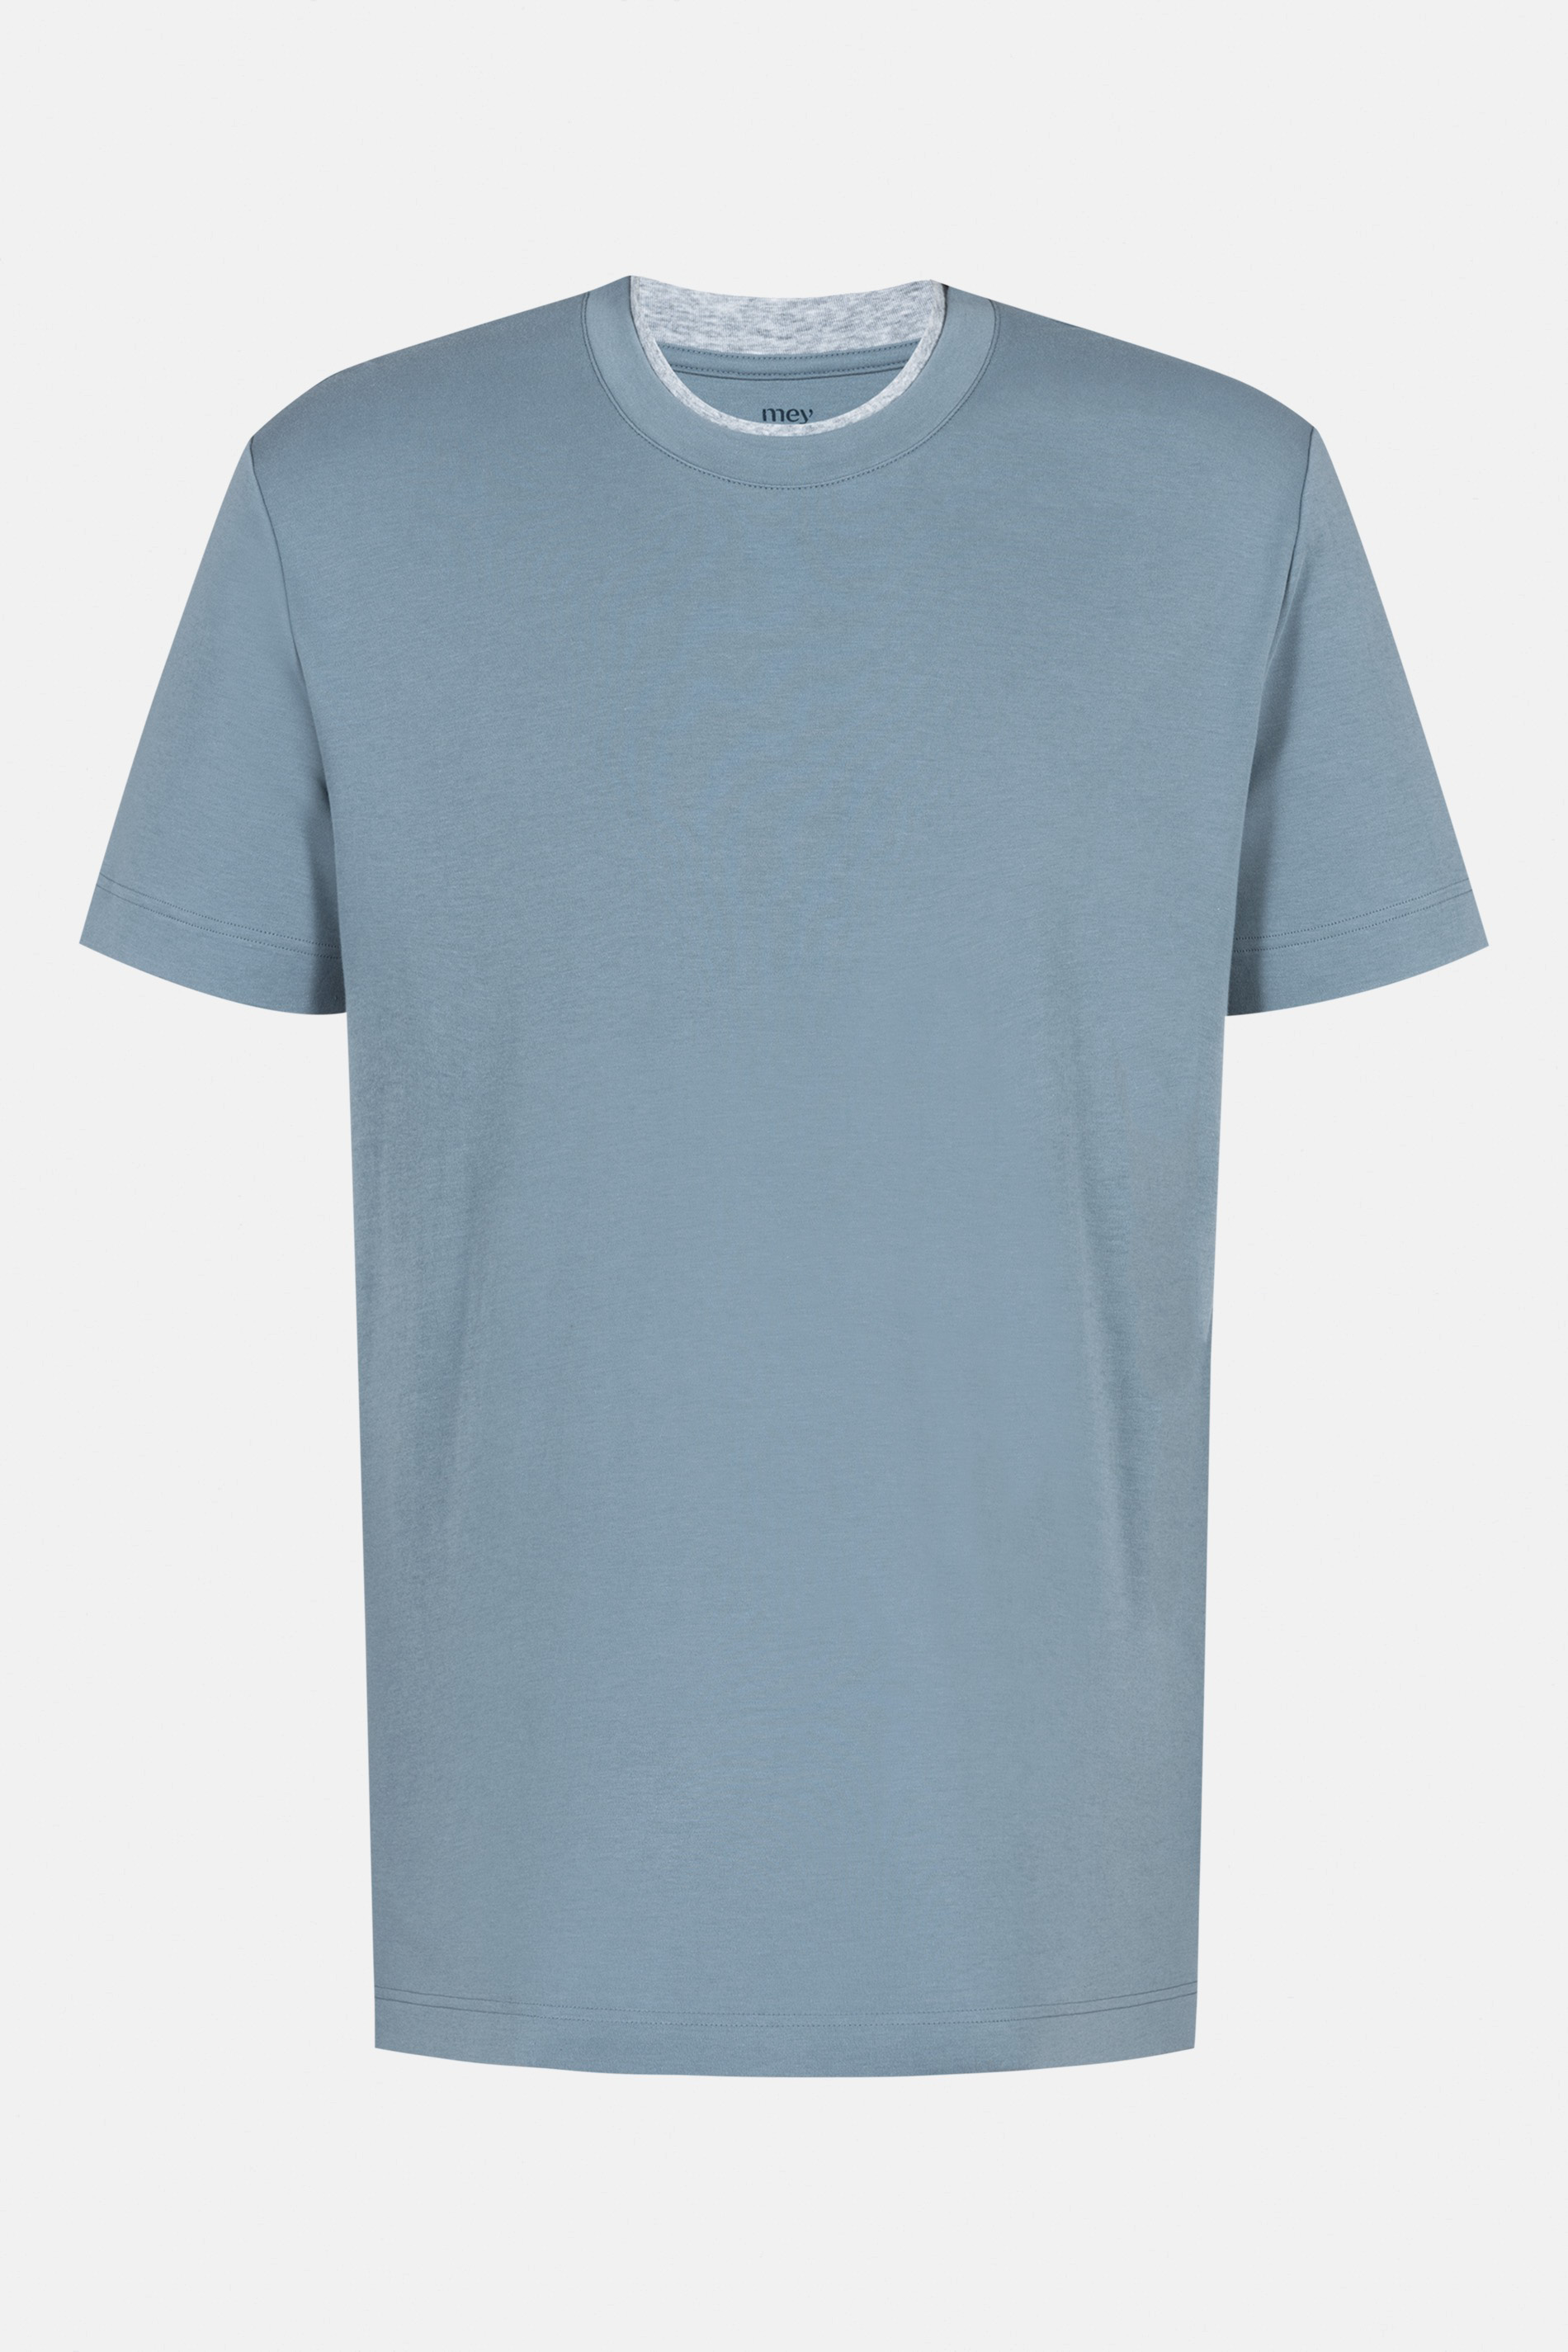 T-shirt Serie N8TEX 2.0 Uitknippen | mey®